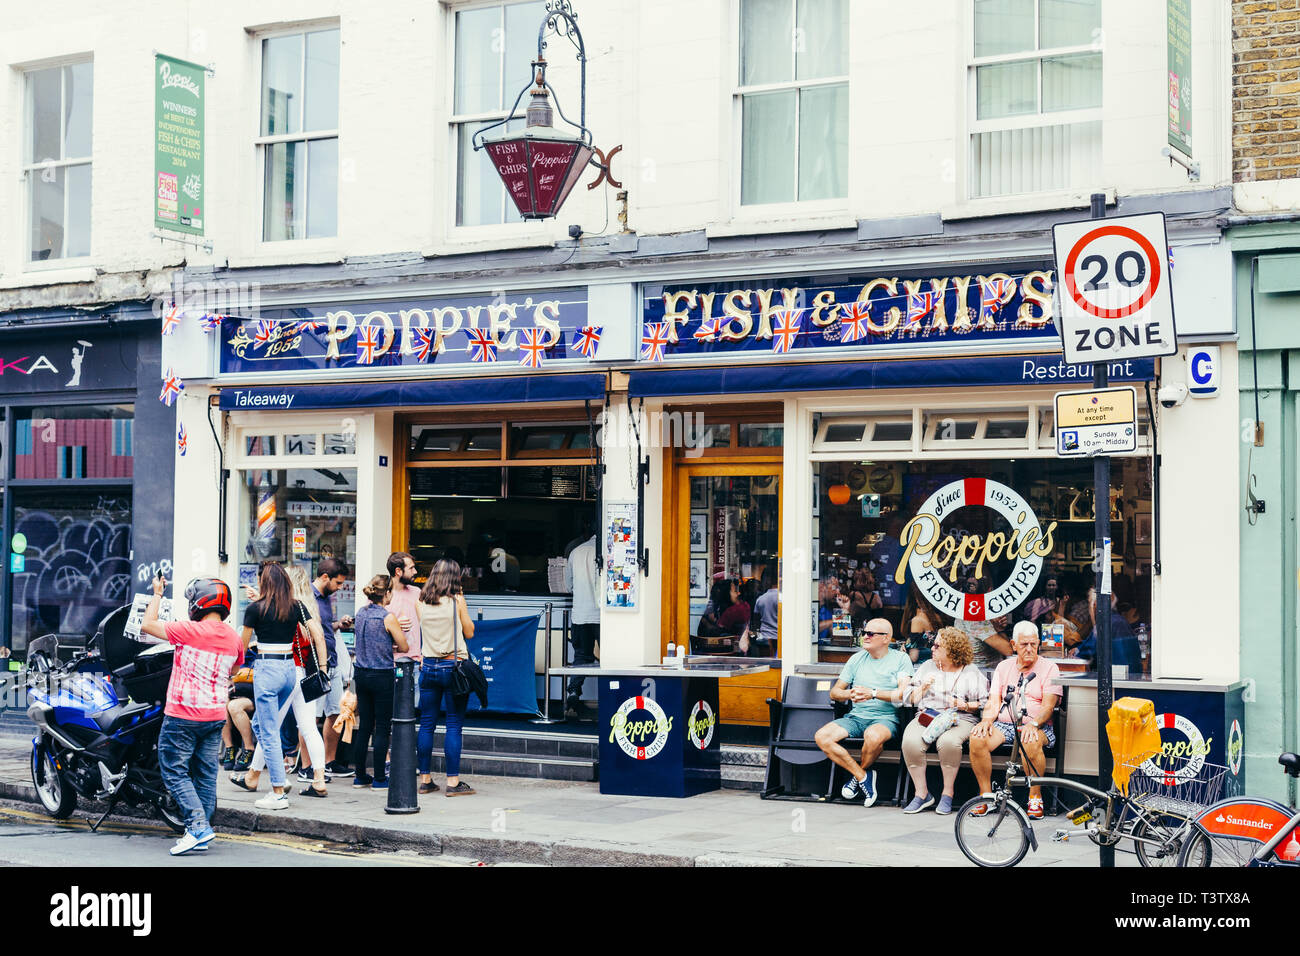 London, UK - July 22, 2018: People sitting on a bench and walking near Poppie's, famous fish & chips shop in Spitalfields, London Stock Photo